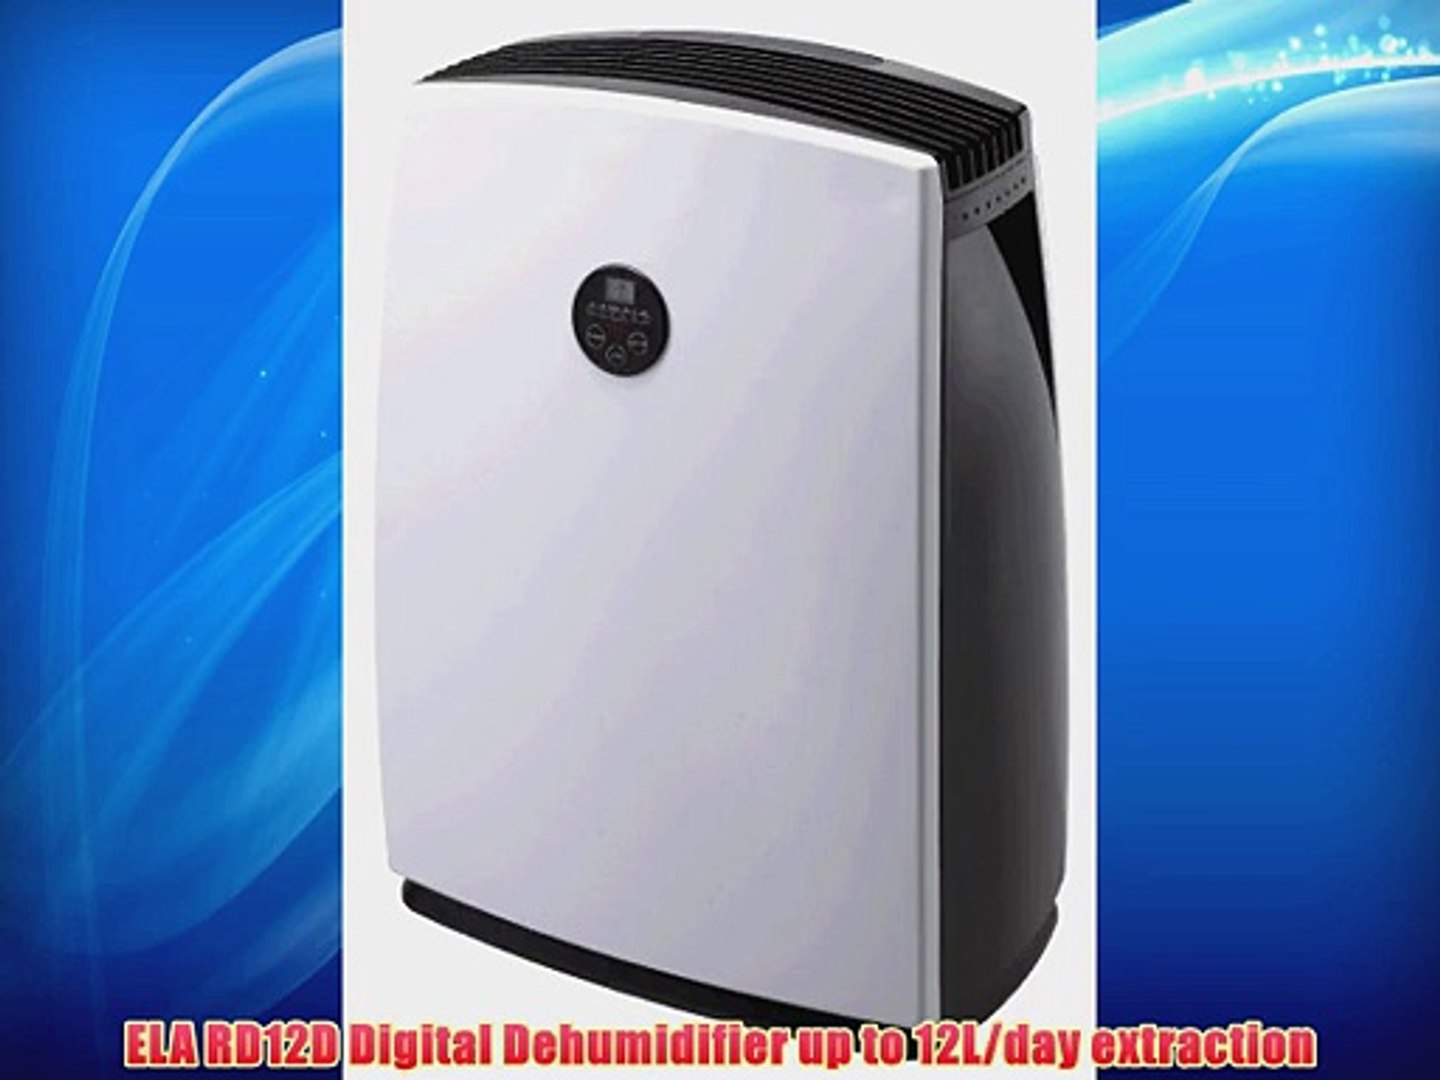 ELA RD12D Digital Dehumidifier up to 12L/day extraction 